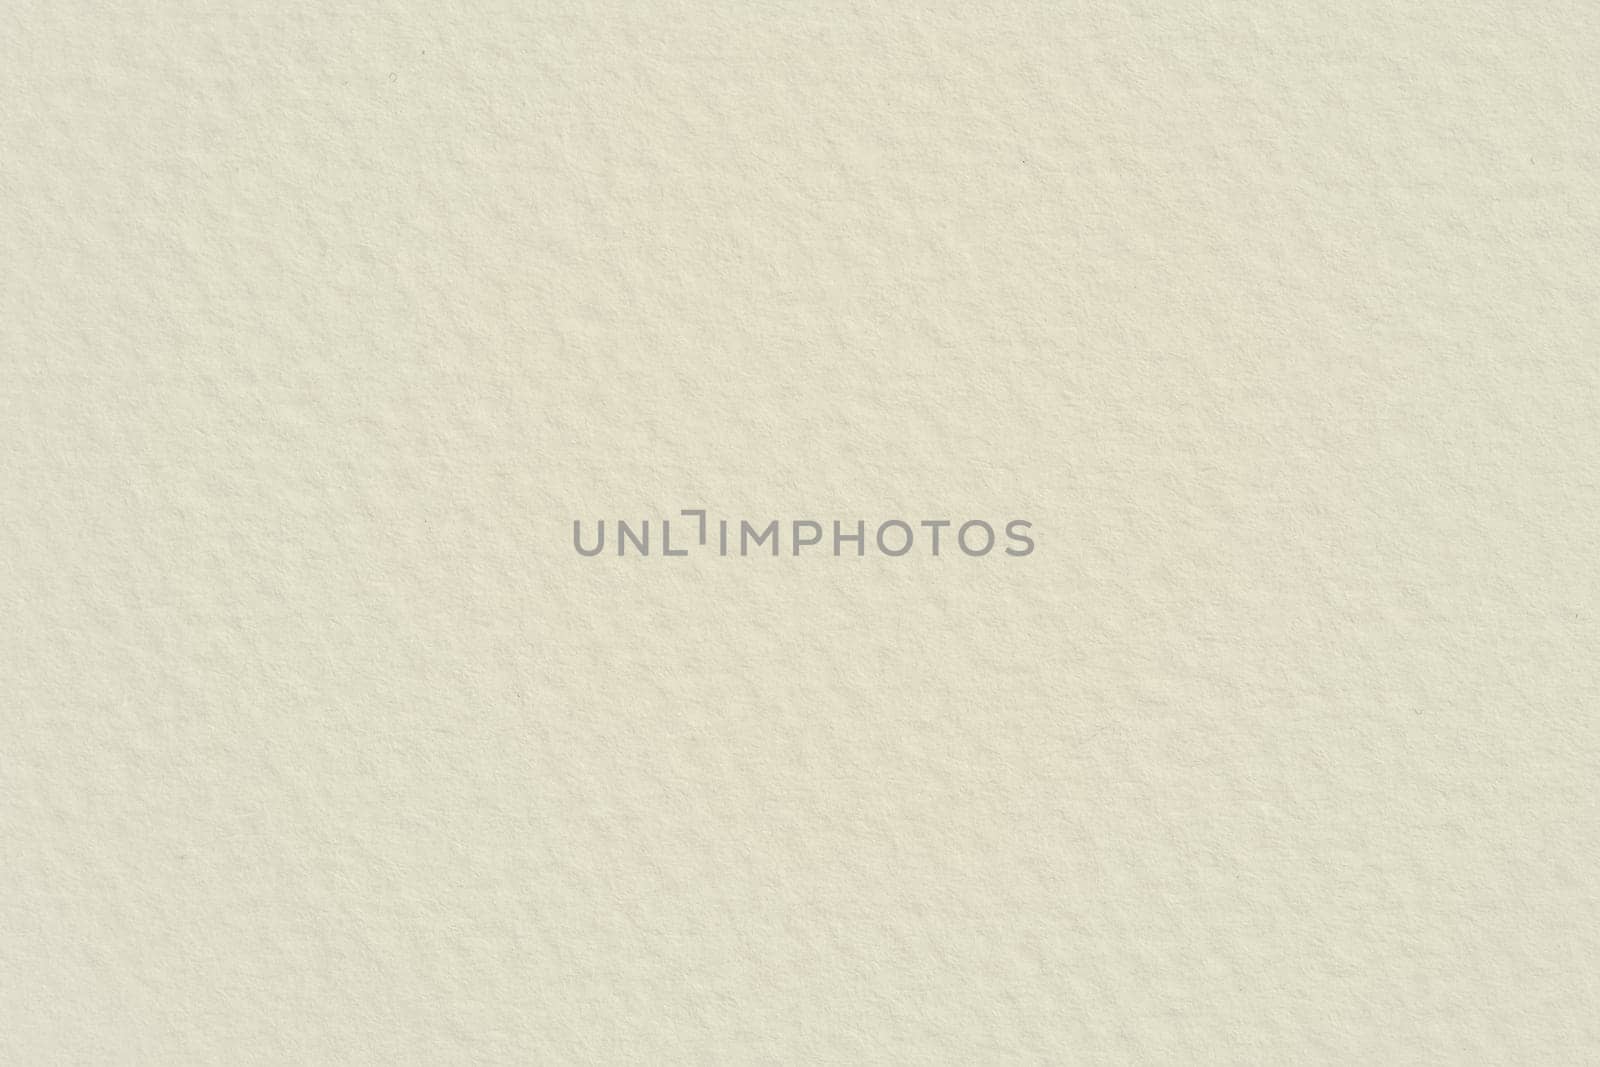 White / gray structured paper texture, can be used as background by Ivanko